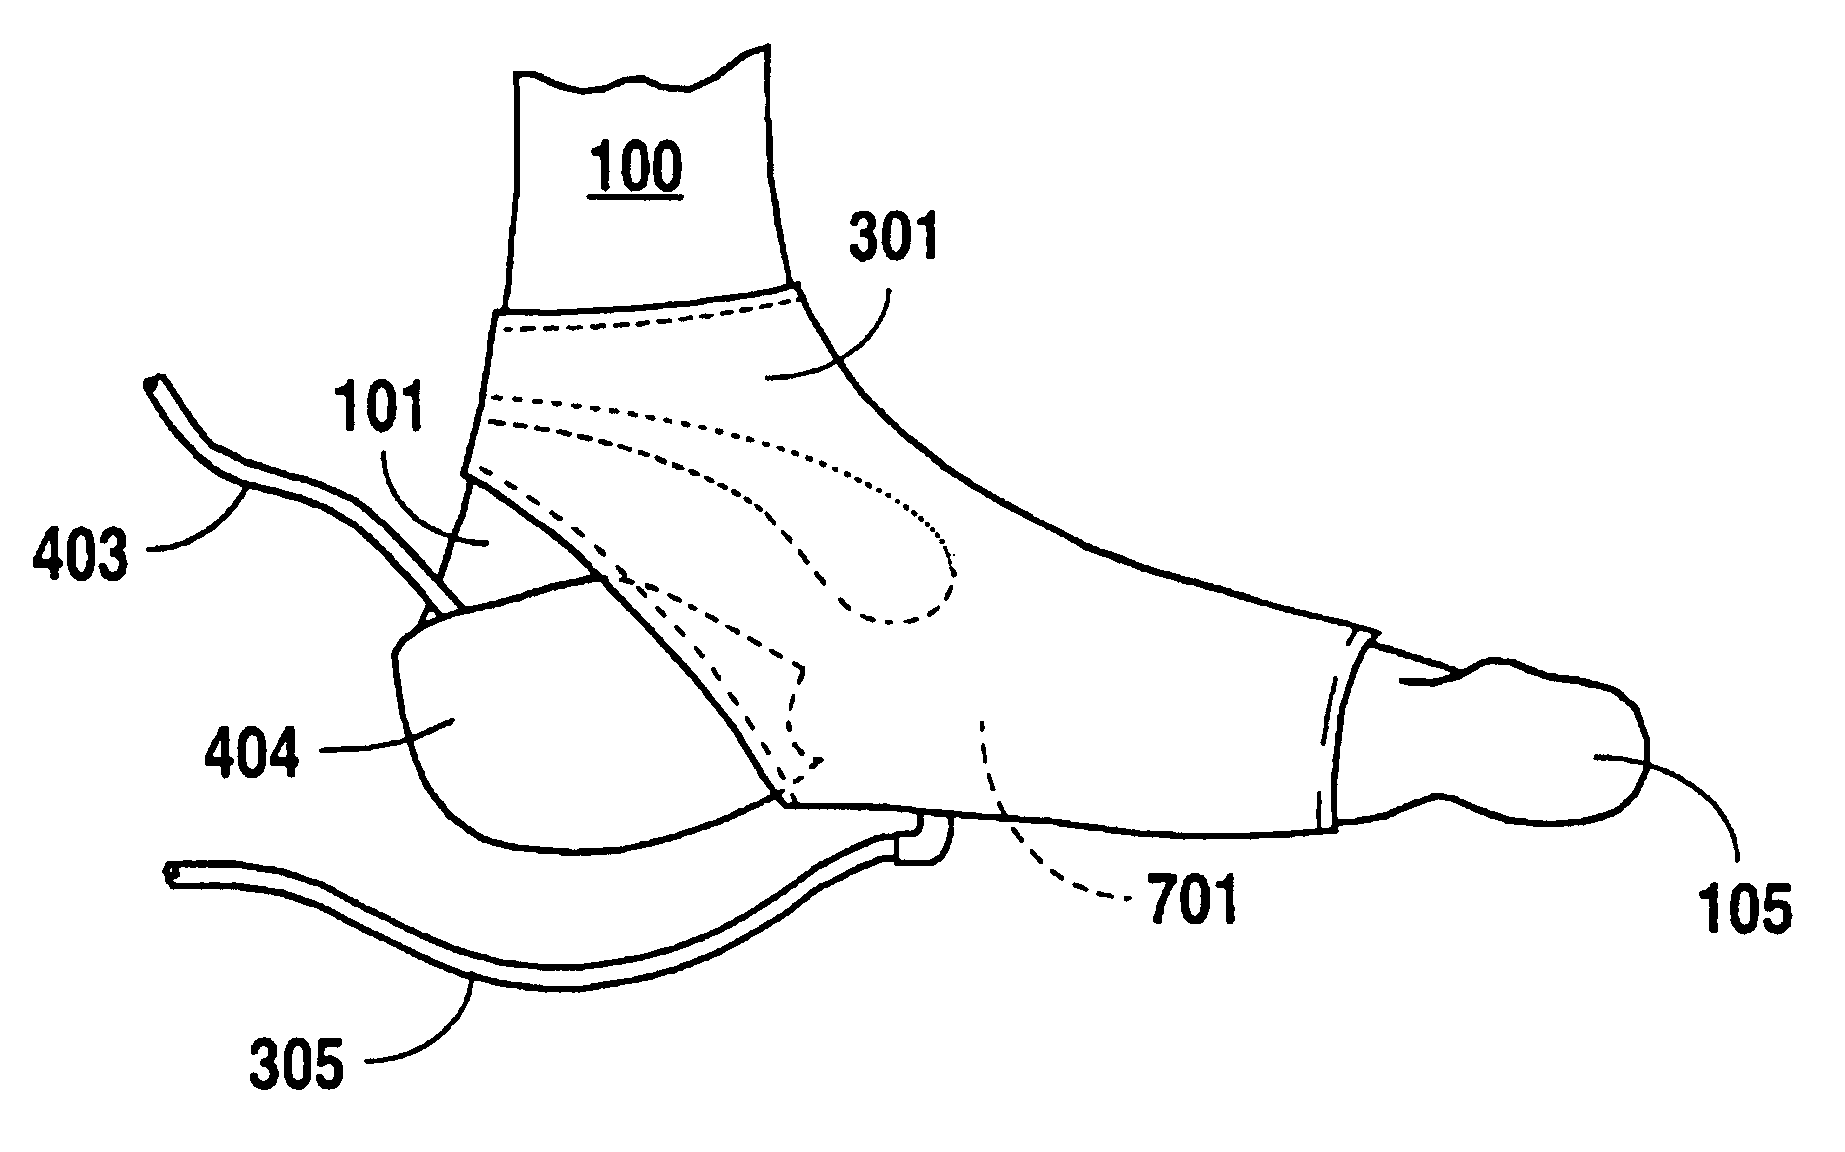 Therapeutic apparatus for treating ulcers